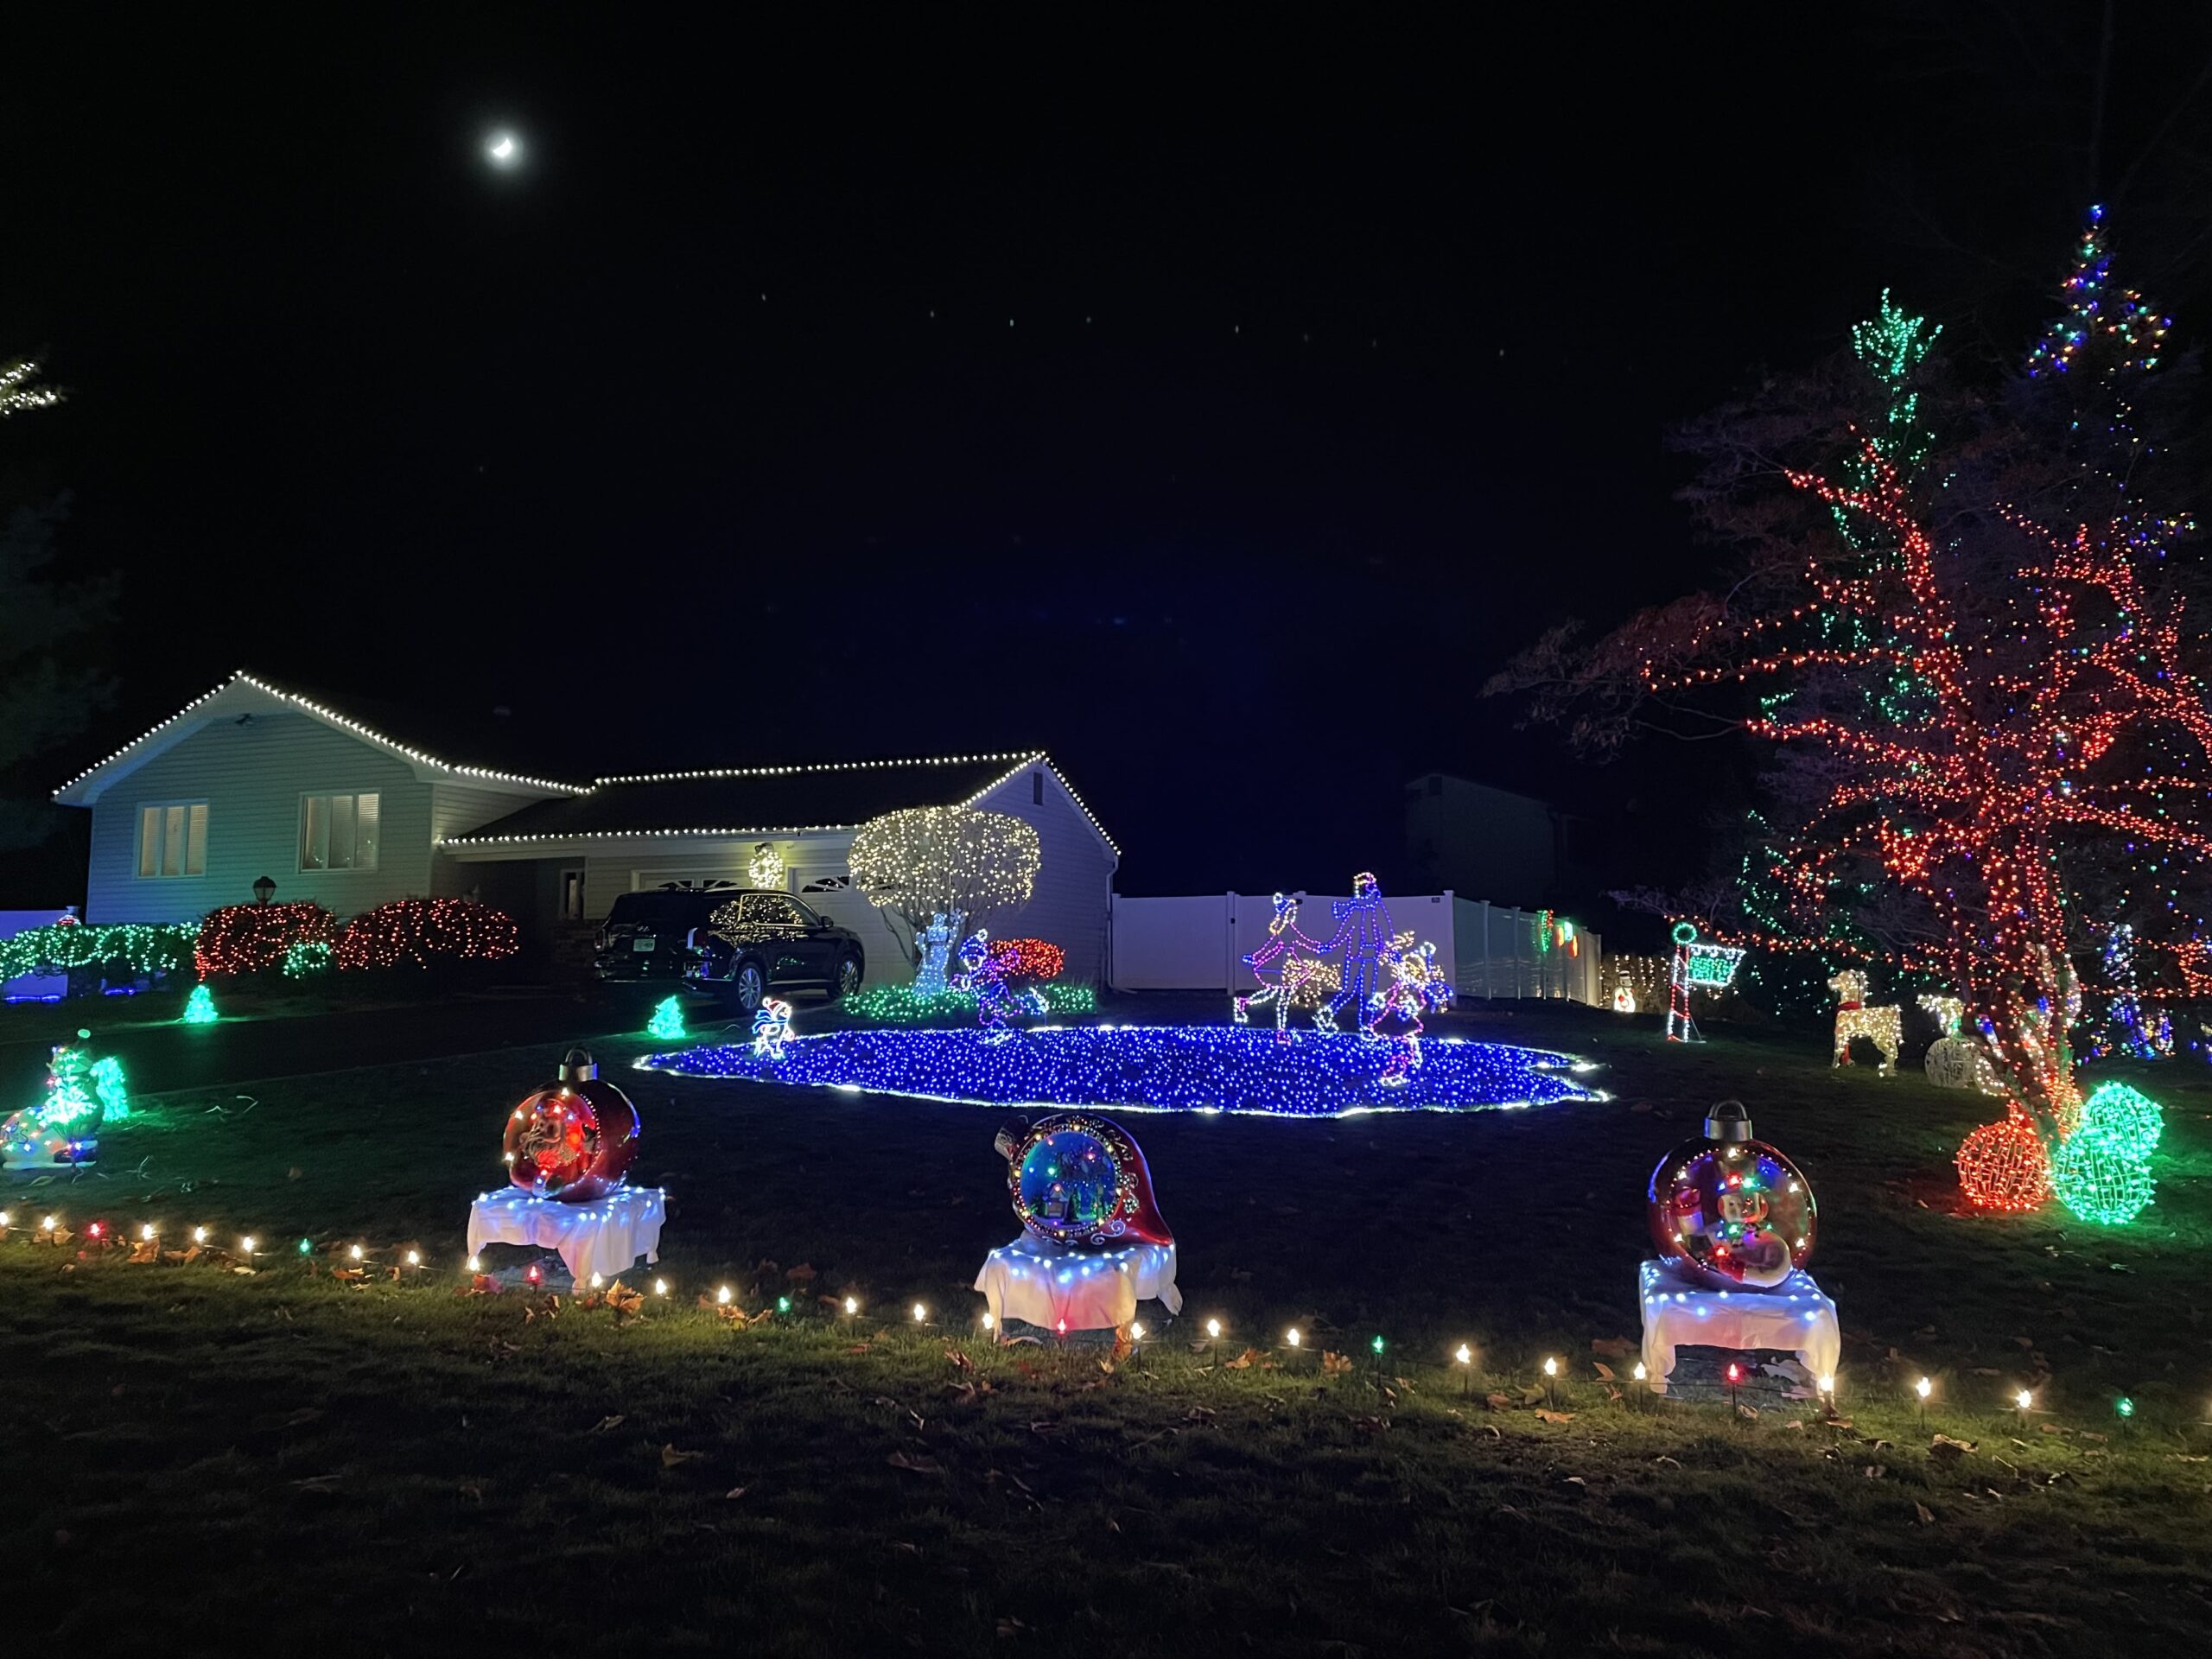 Flanagan's Christmas Lights in Manalapan New Jersey lit up pond of ice skaters and ornaments